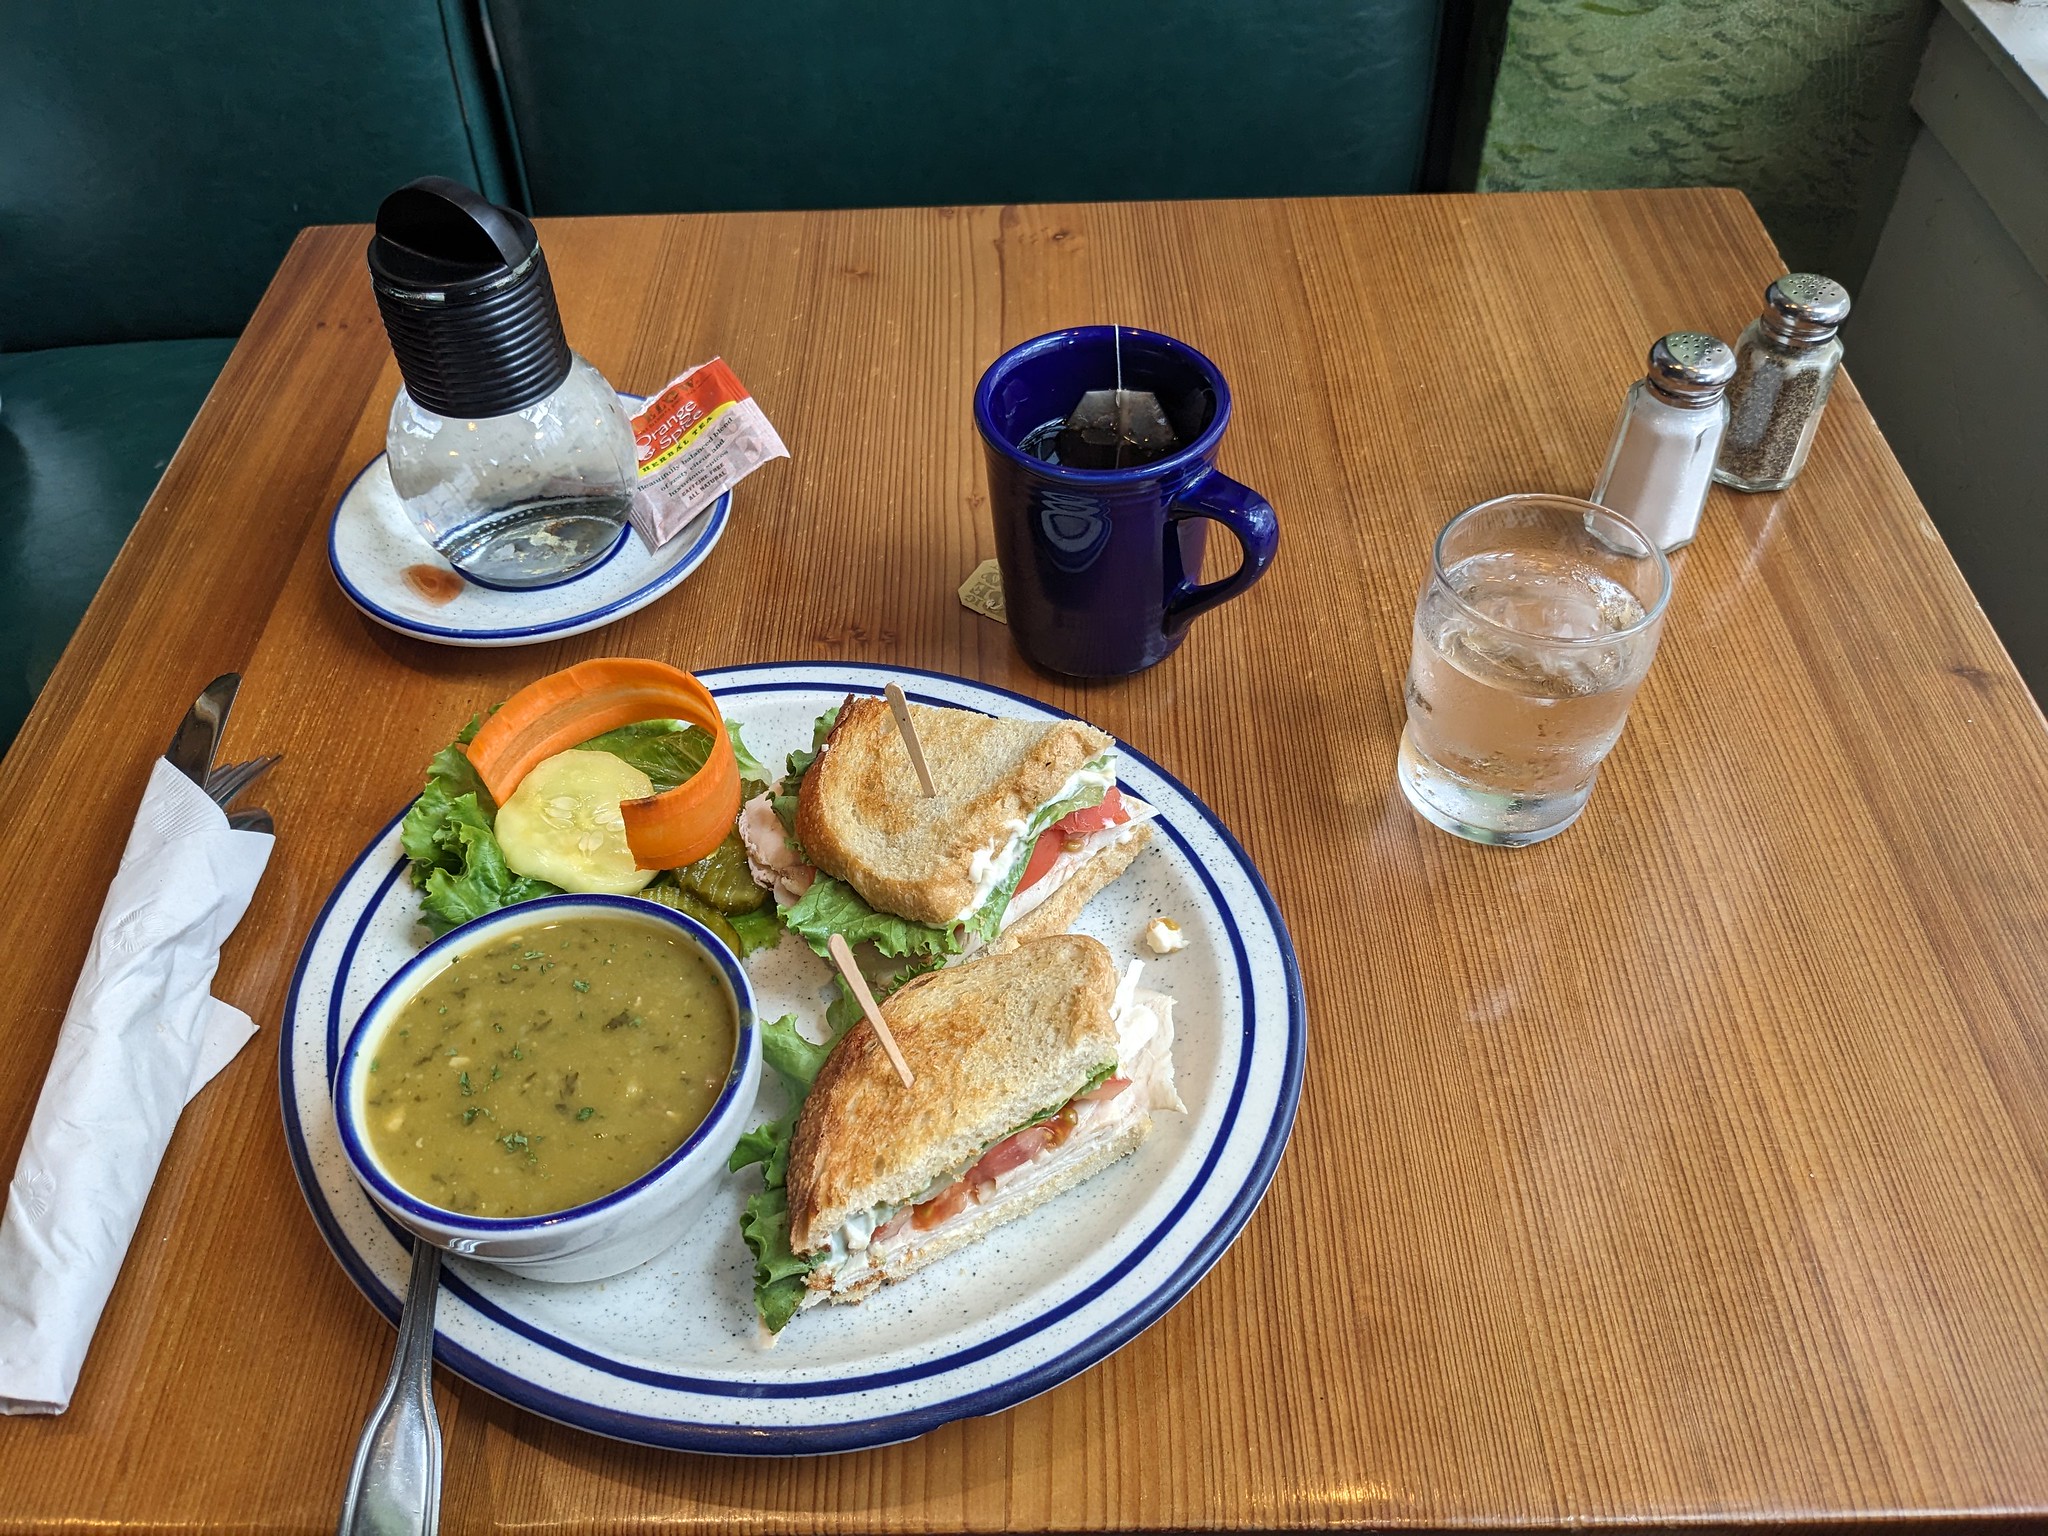 Sandwich and Soup at The Little Swiss Cafe